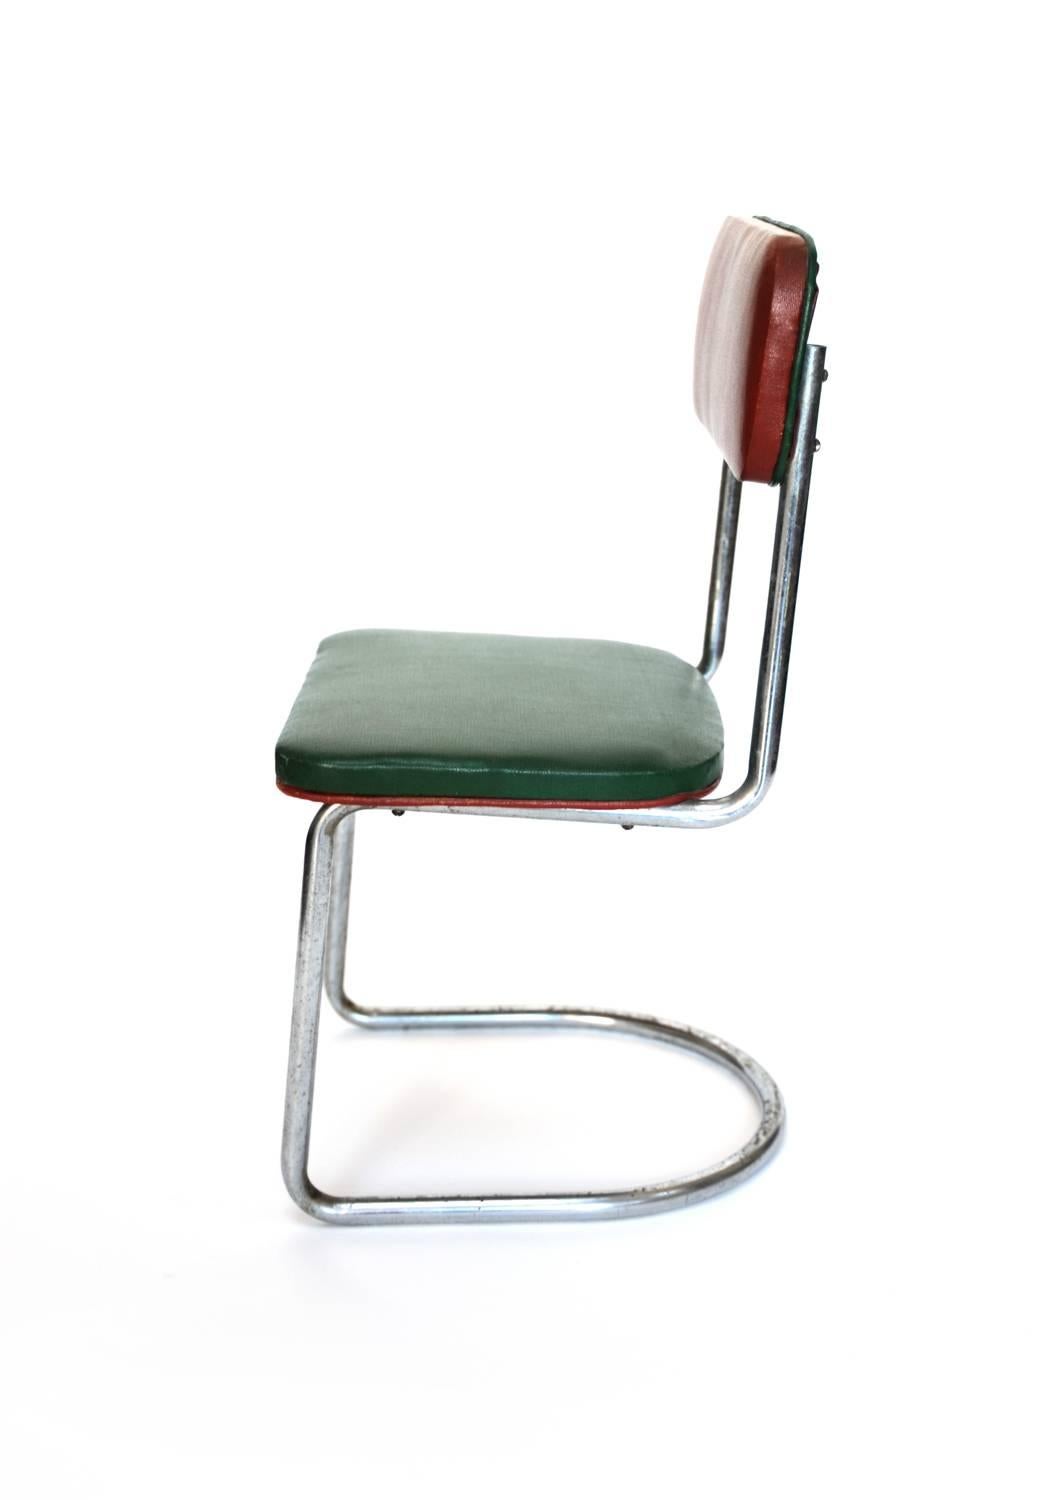 Mid-Century Modern Cantilevered Tubular Steel Chair, in the Style of Marcel Breuer, France, 1940s For Sale